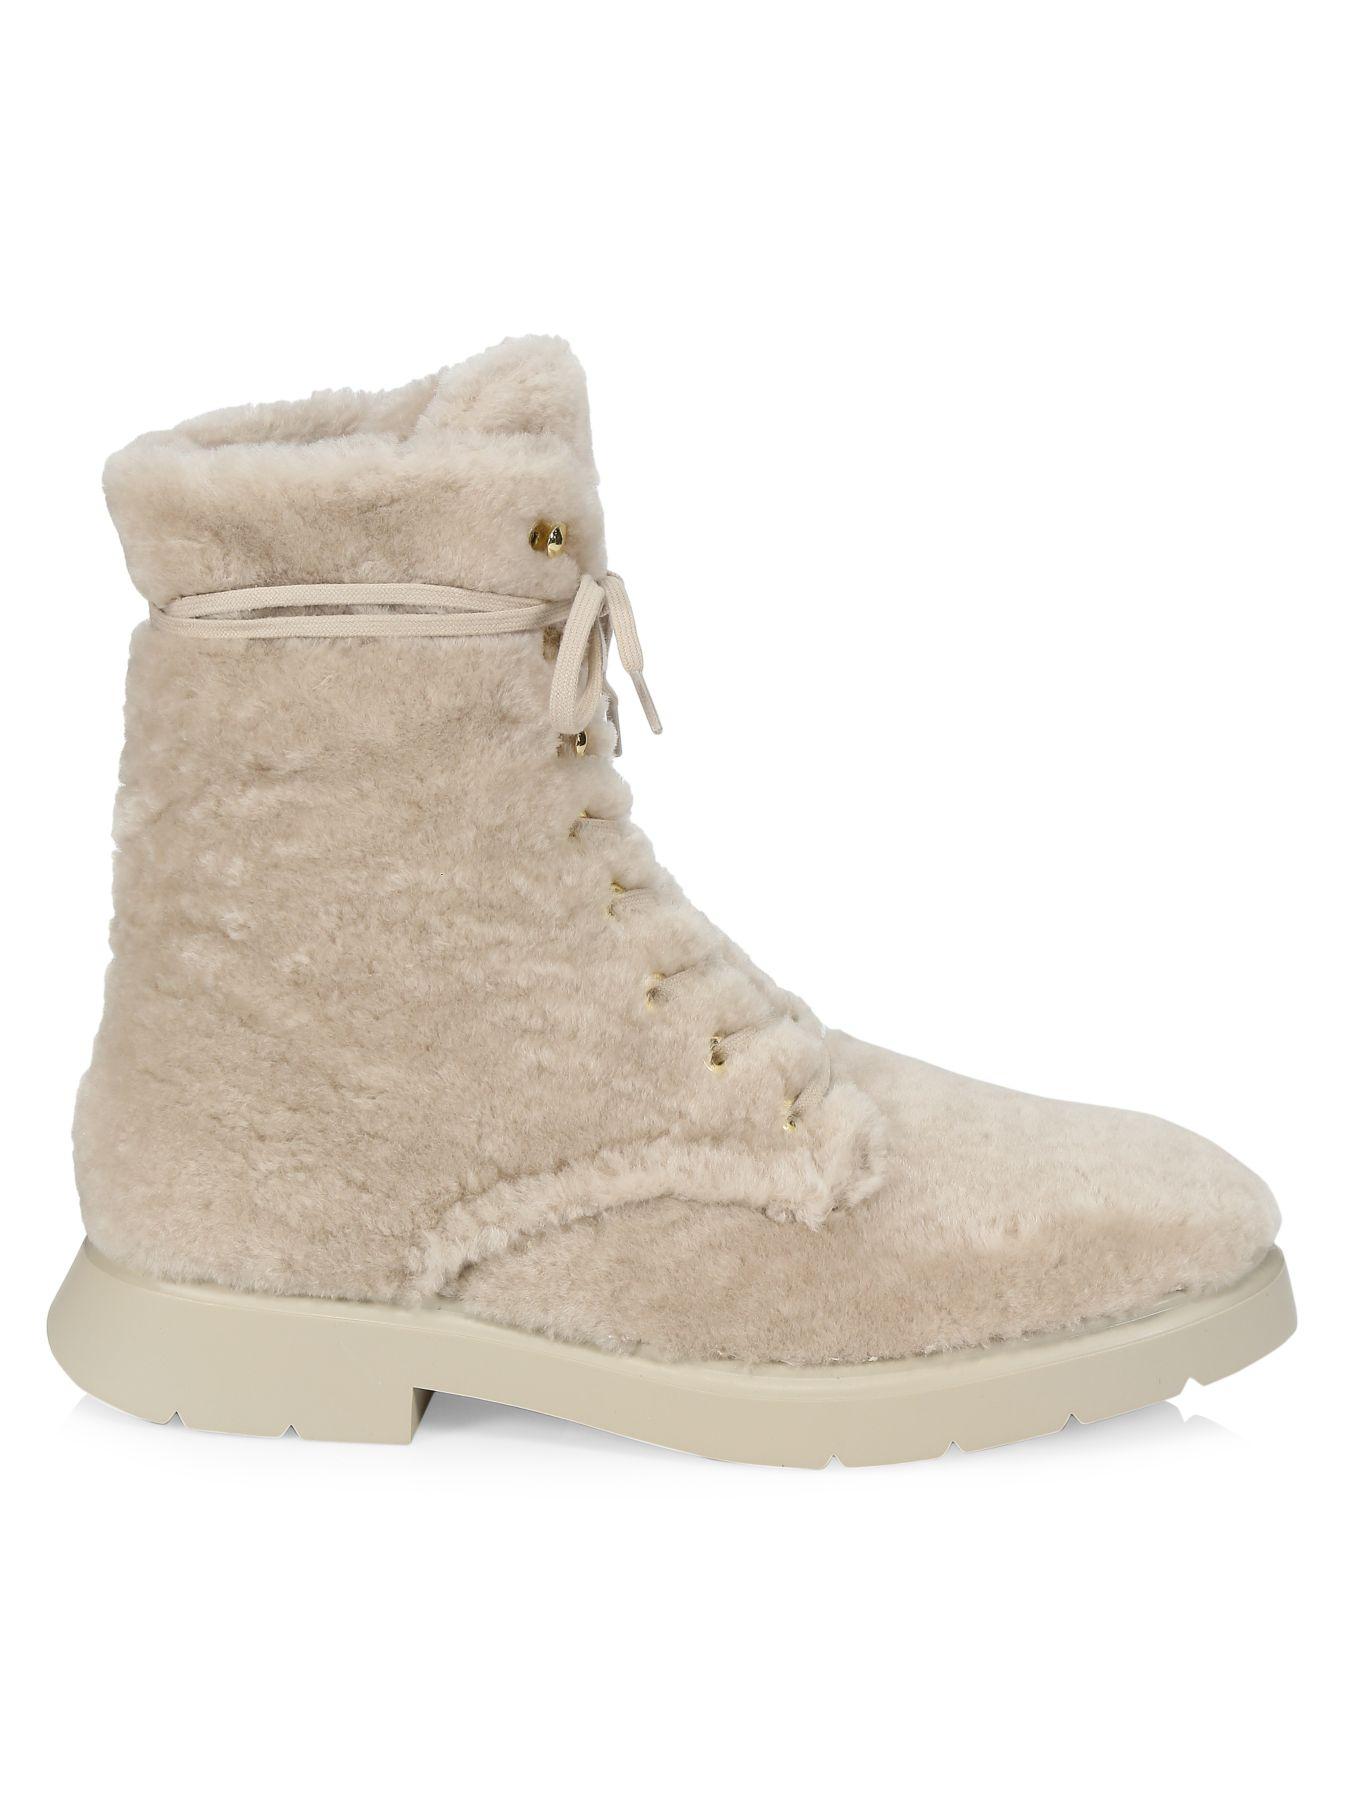 Stuart Weitzman Mckenzee Chill Shearling & Leather Combat Boots in